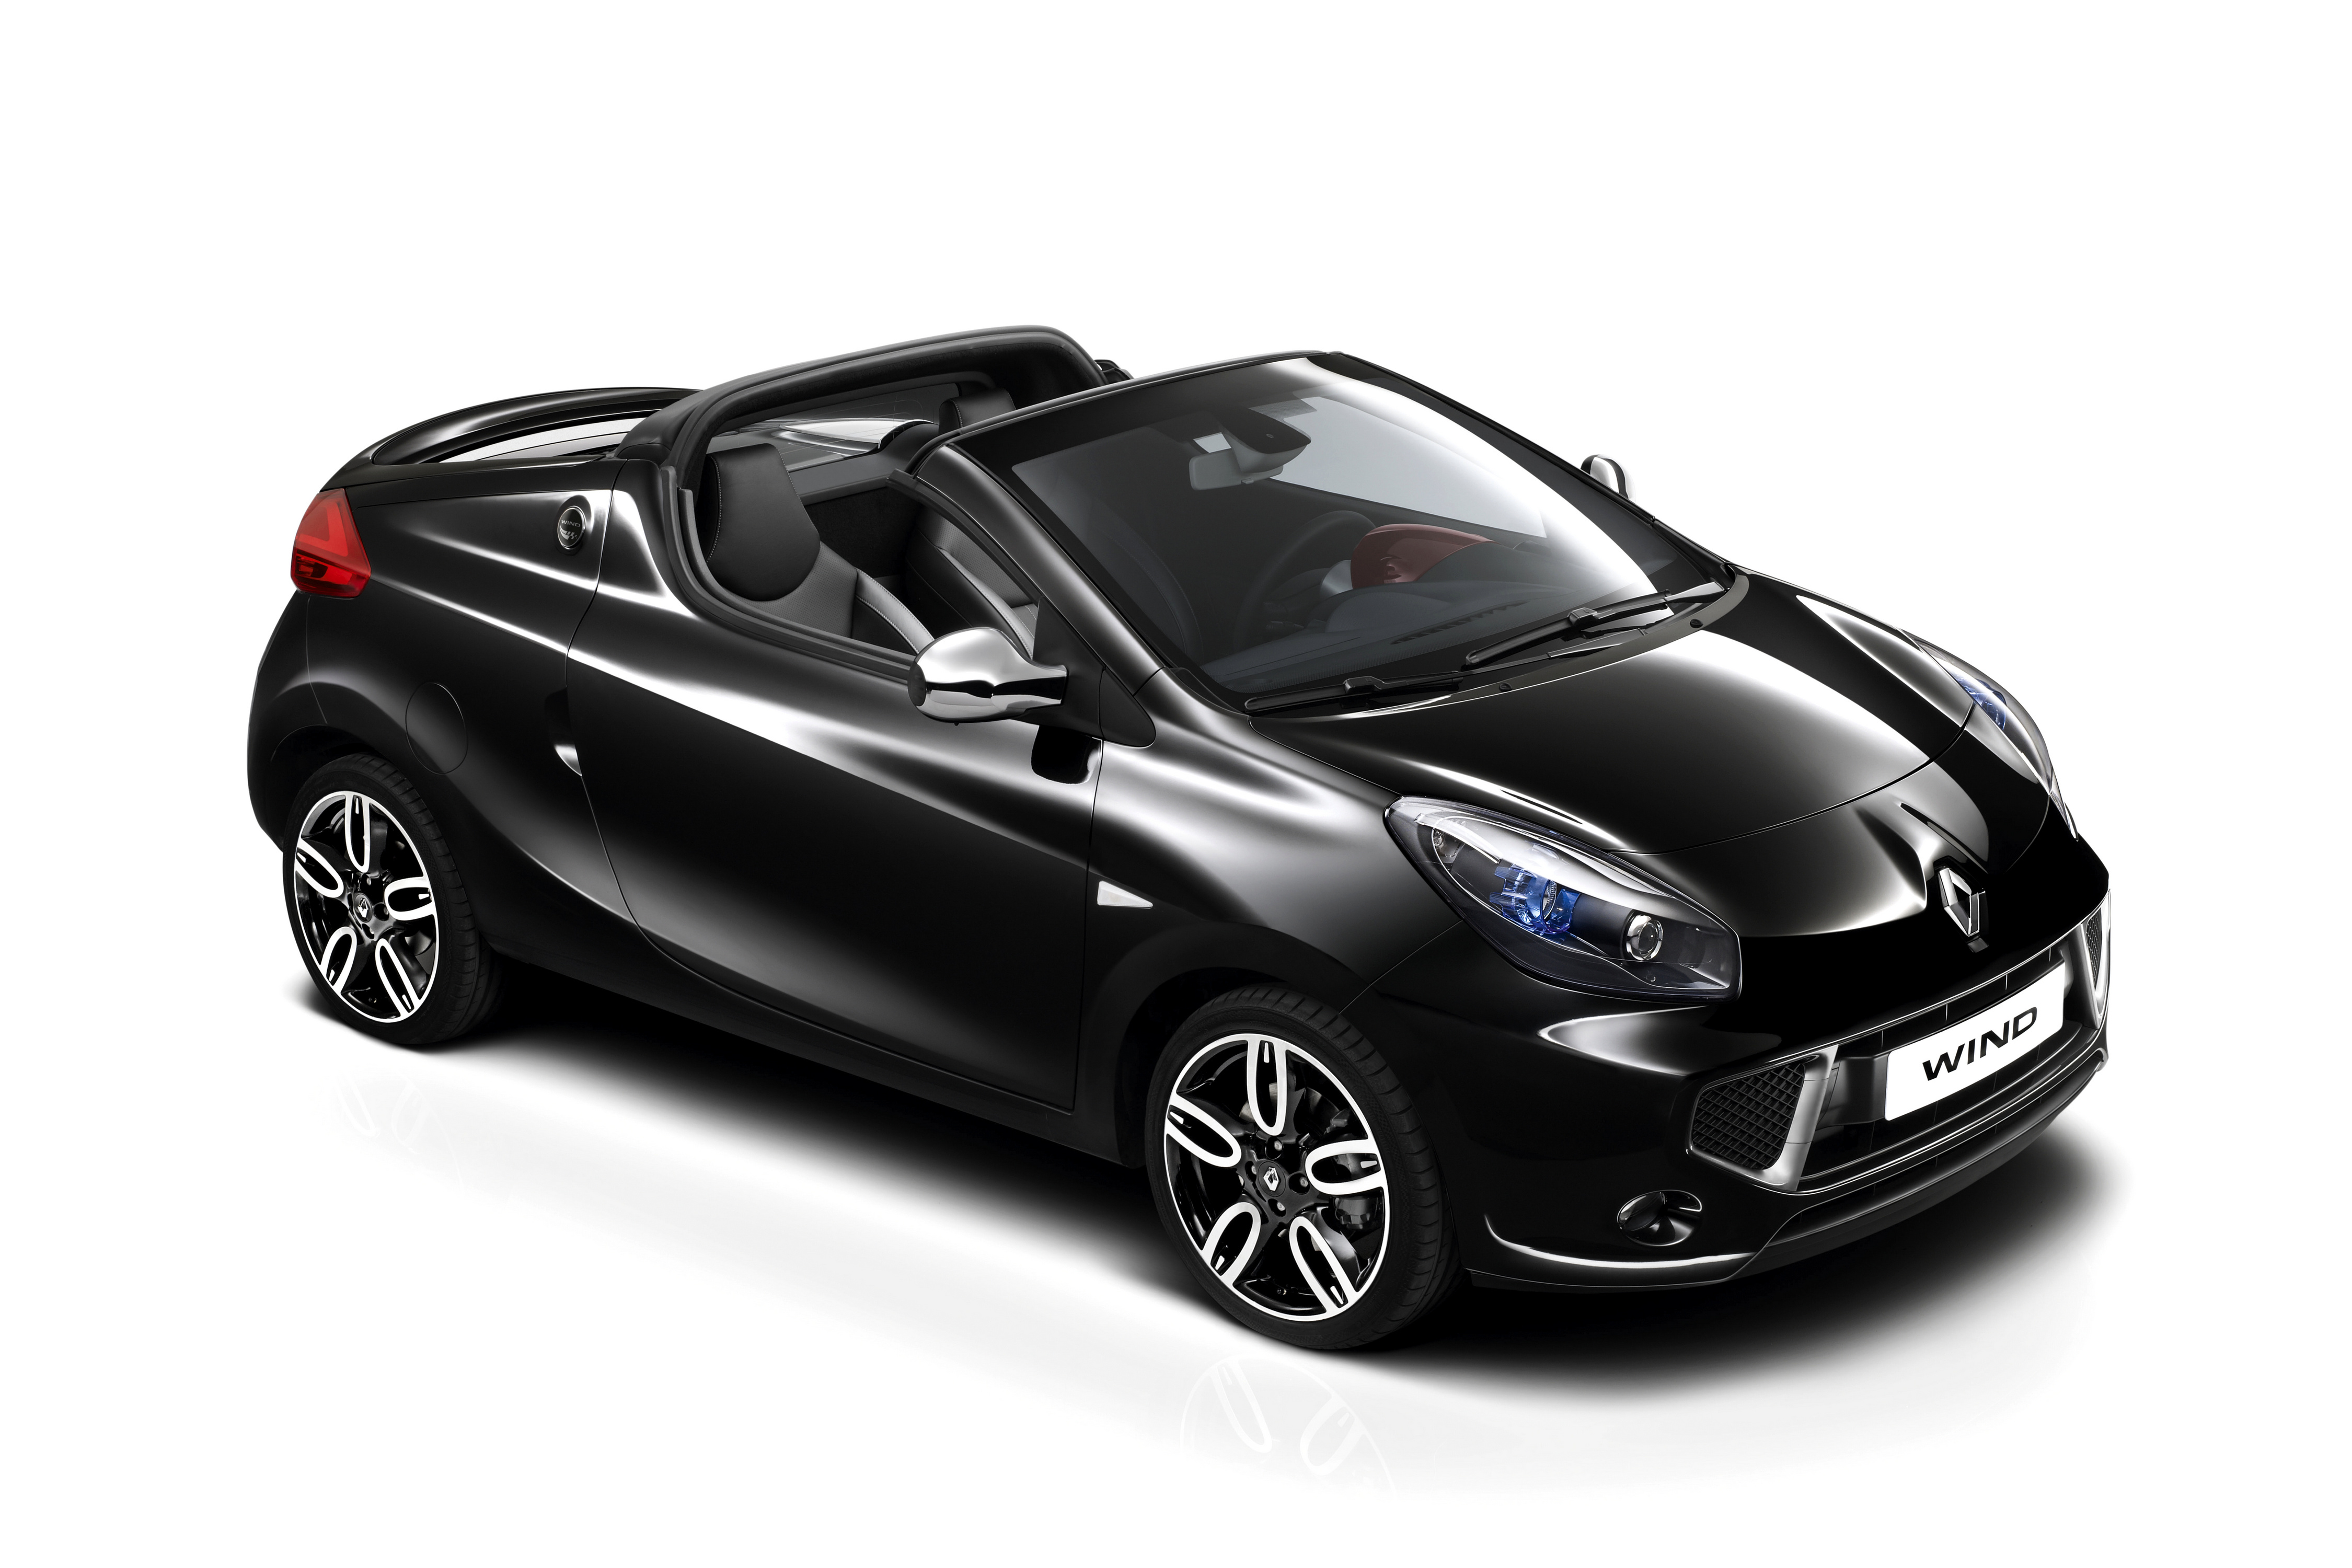 Wallpapers cars Renault convertible on the desktop